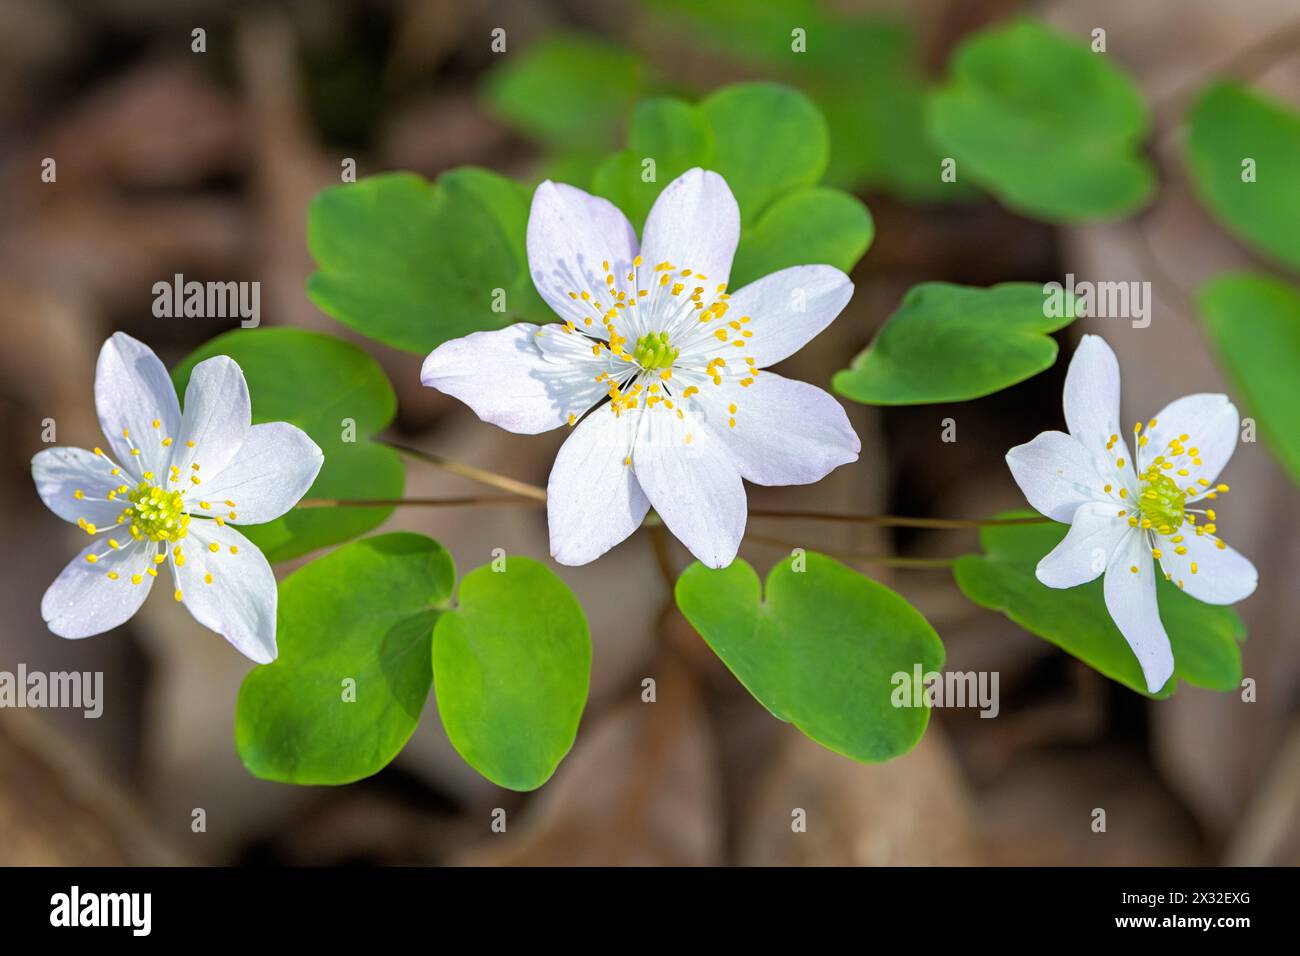 Three blossoms of a rue anemone blooming on a woodland floor that is filled with leaves. Stock Photo